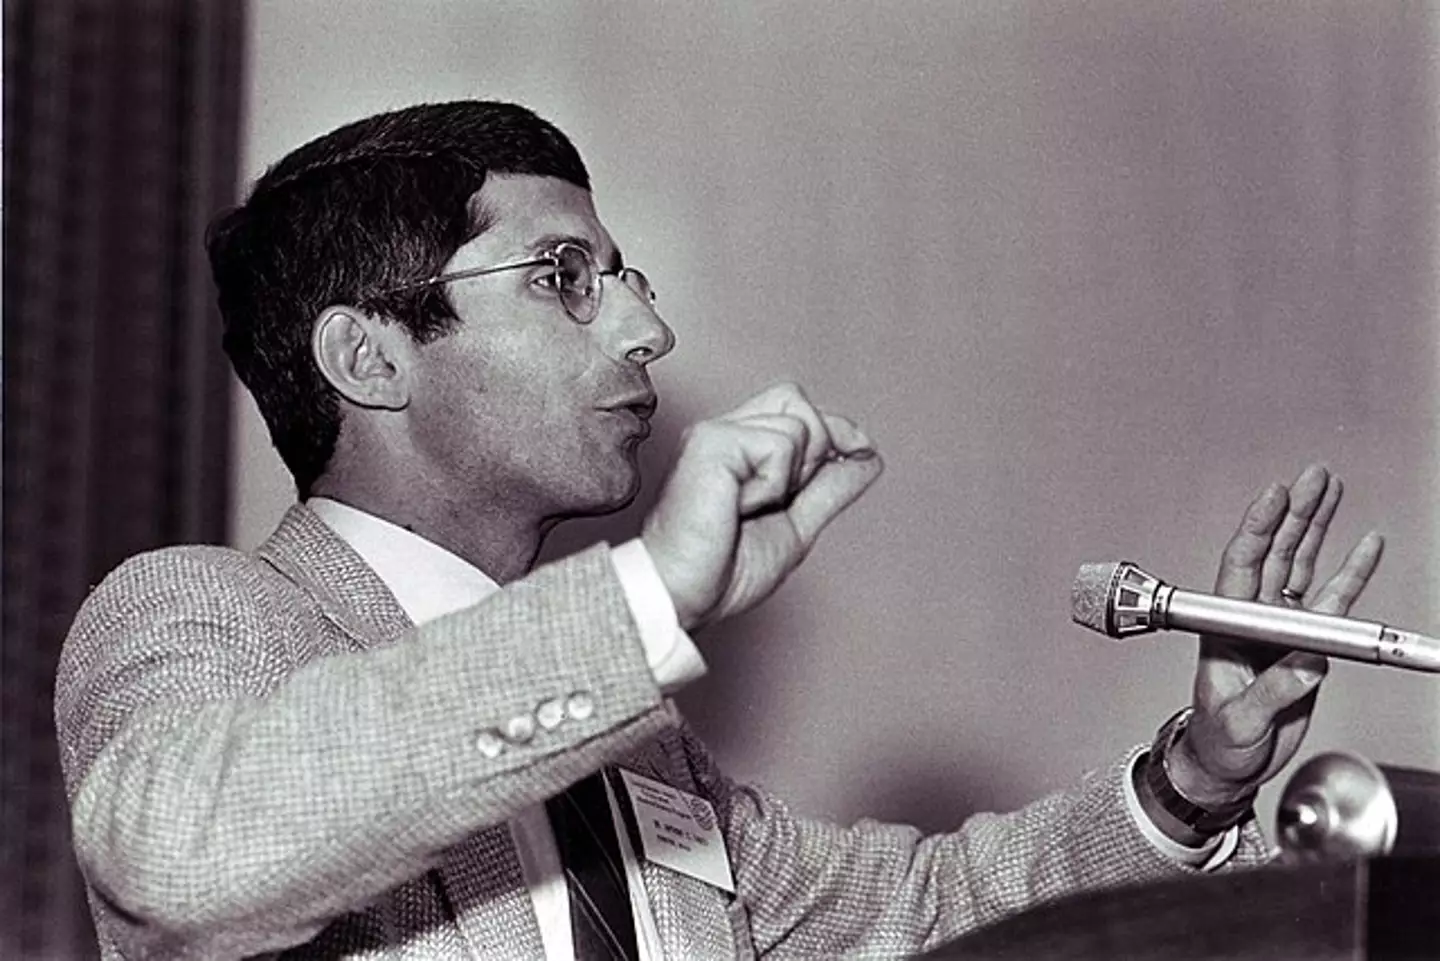 Dr Anthony Fauci delivering a talk on the AIDS epidemic in 1985.